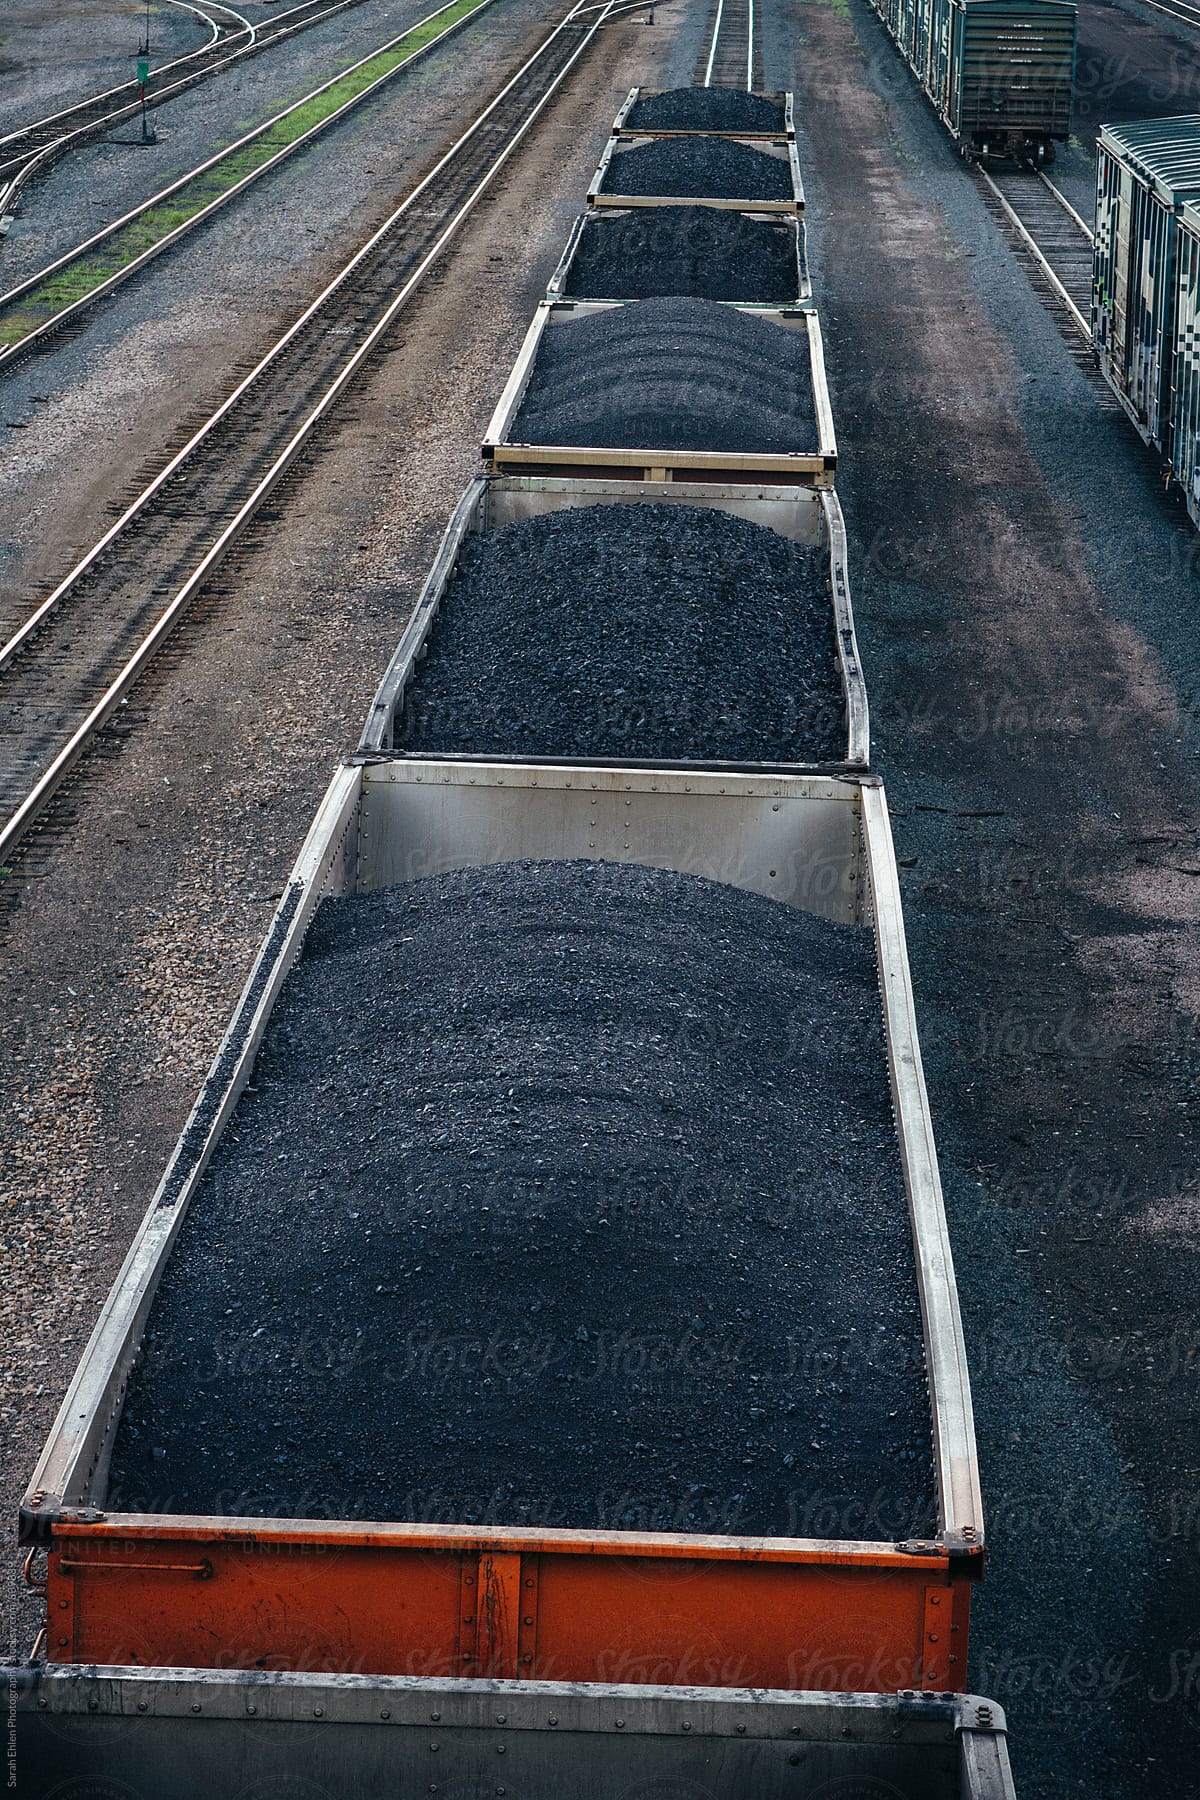 Railroad cars filled with coal.